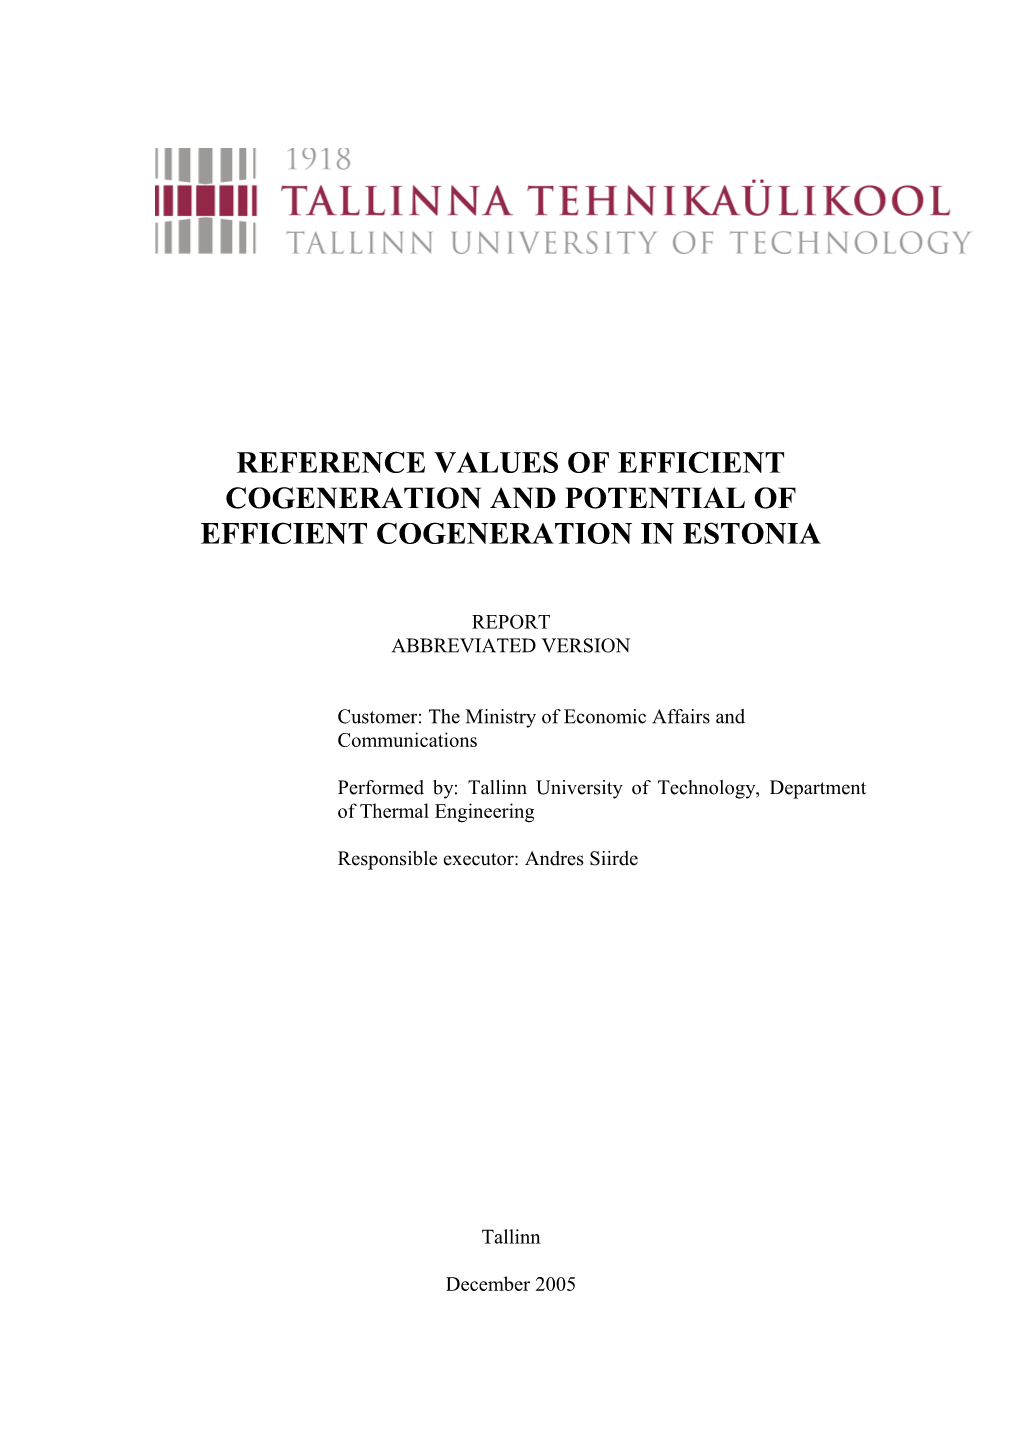 Reference Values of Efficient Cogeneration and Potential of Efficient Cogeneration in Estonia